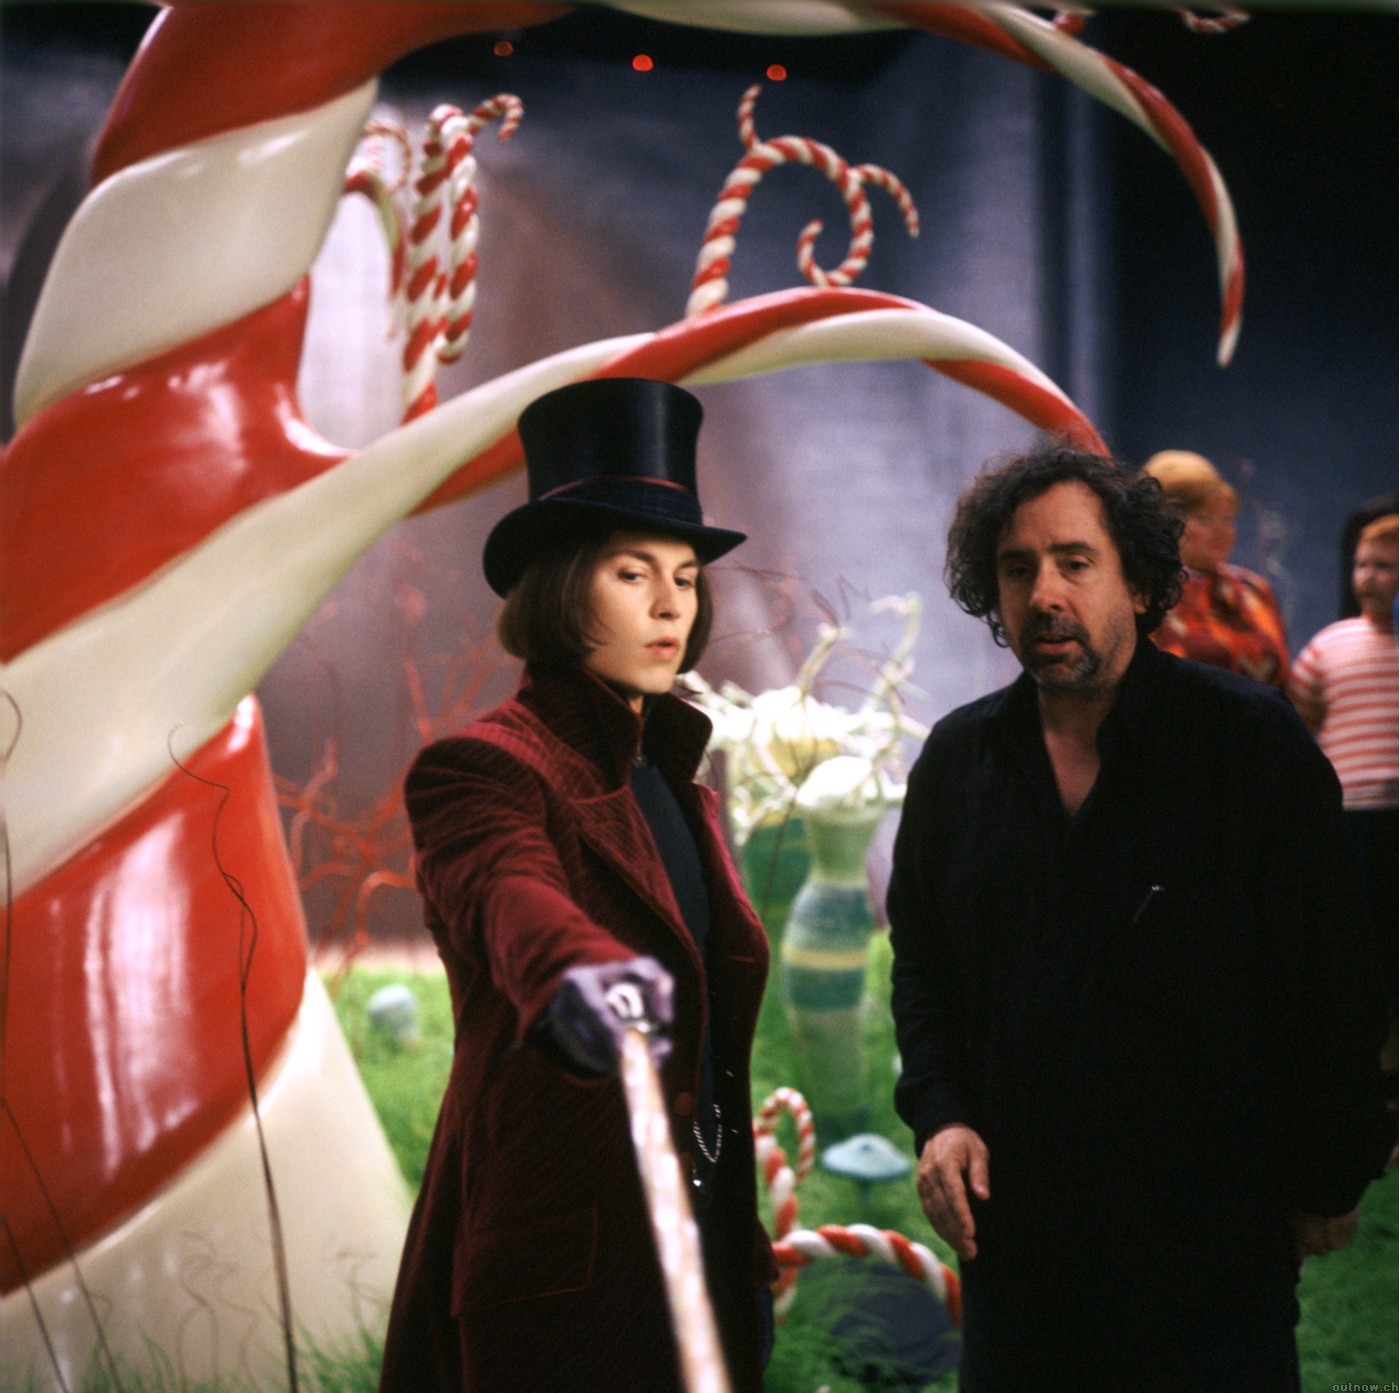 Behind the scenes of Charlie and the Chocolate Factory - Movies, Behind the scenes, Charlie and the Chocolate Factory, Tim Burton, Johnny Depp, Longpost